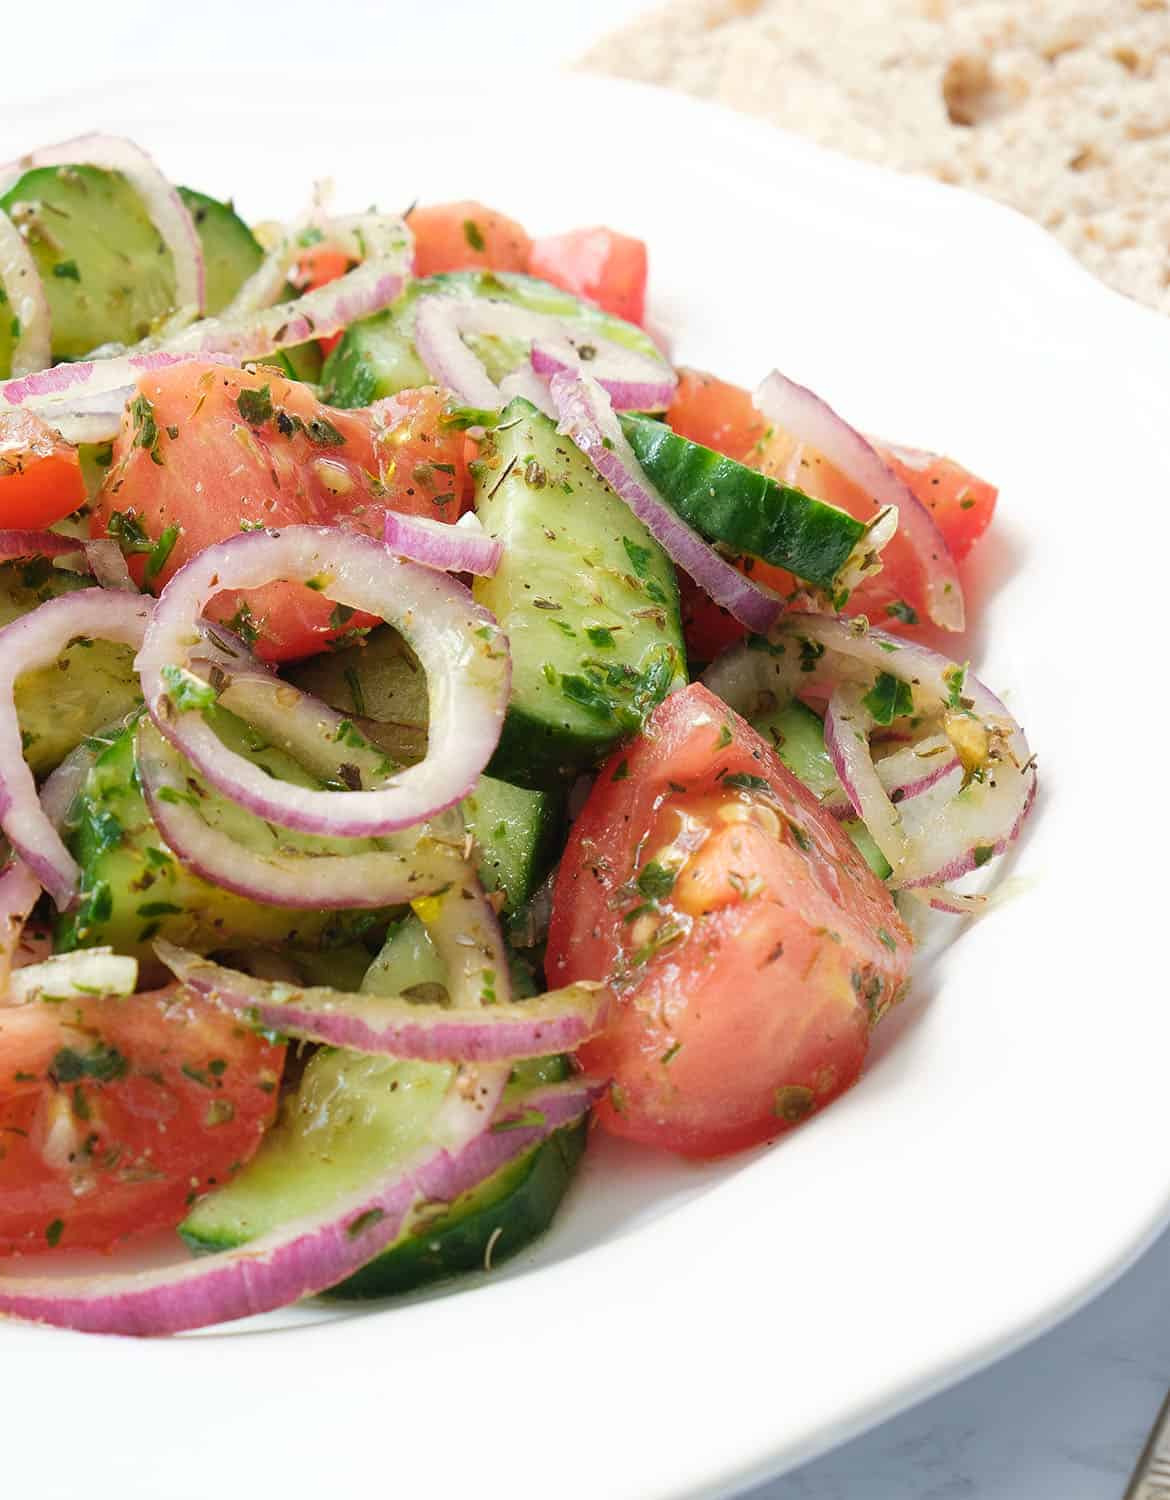 Tomato and cucumber salad with onion rings on a white plate.